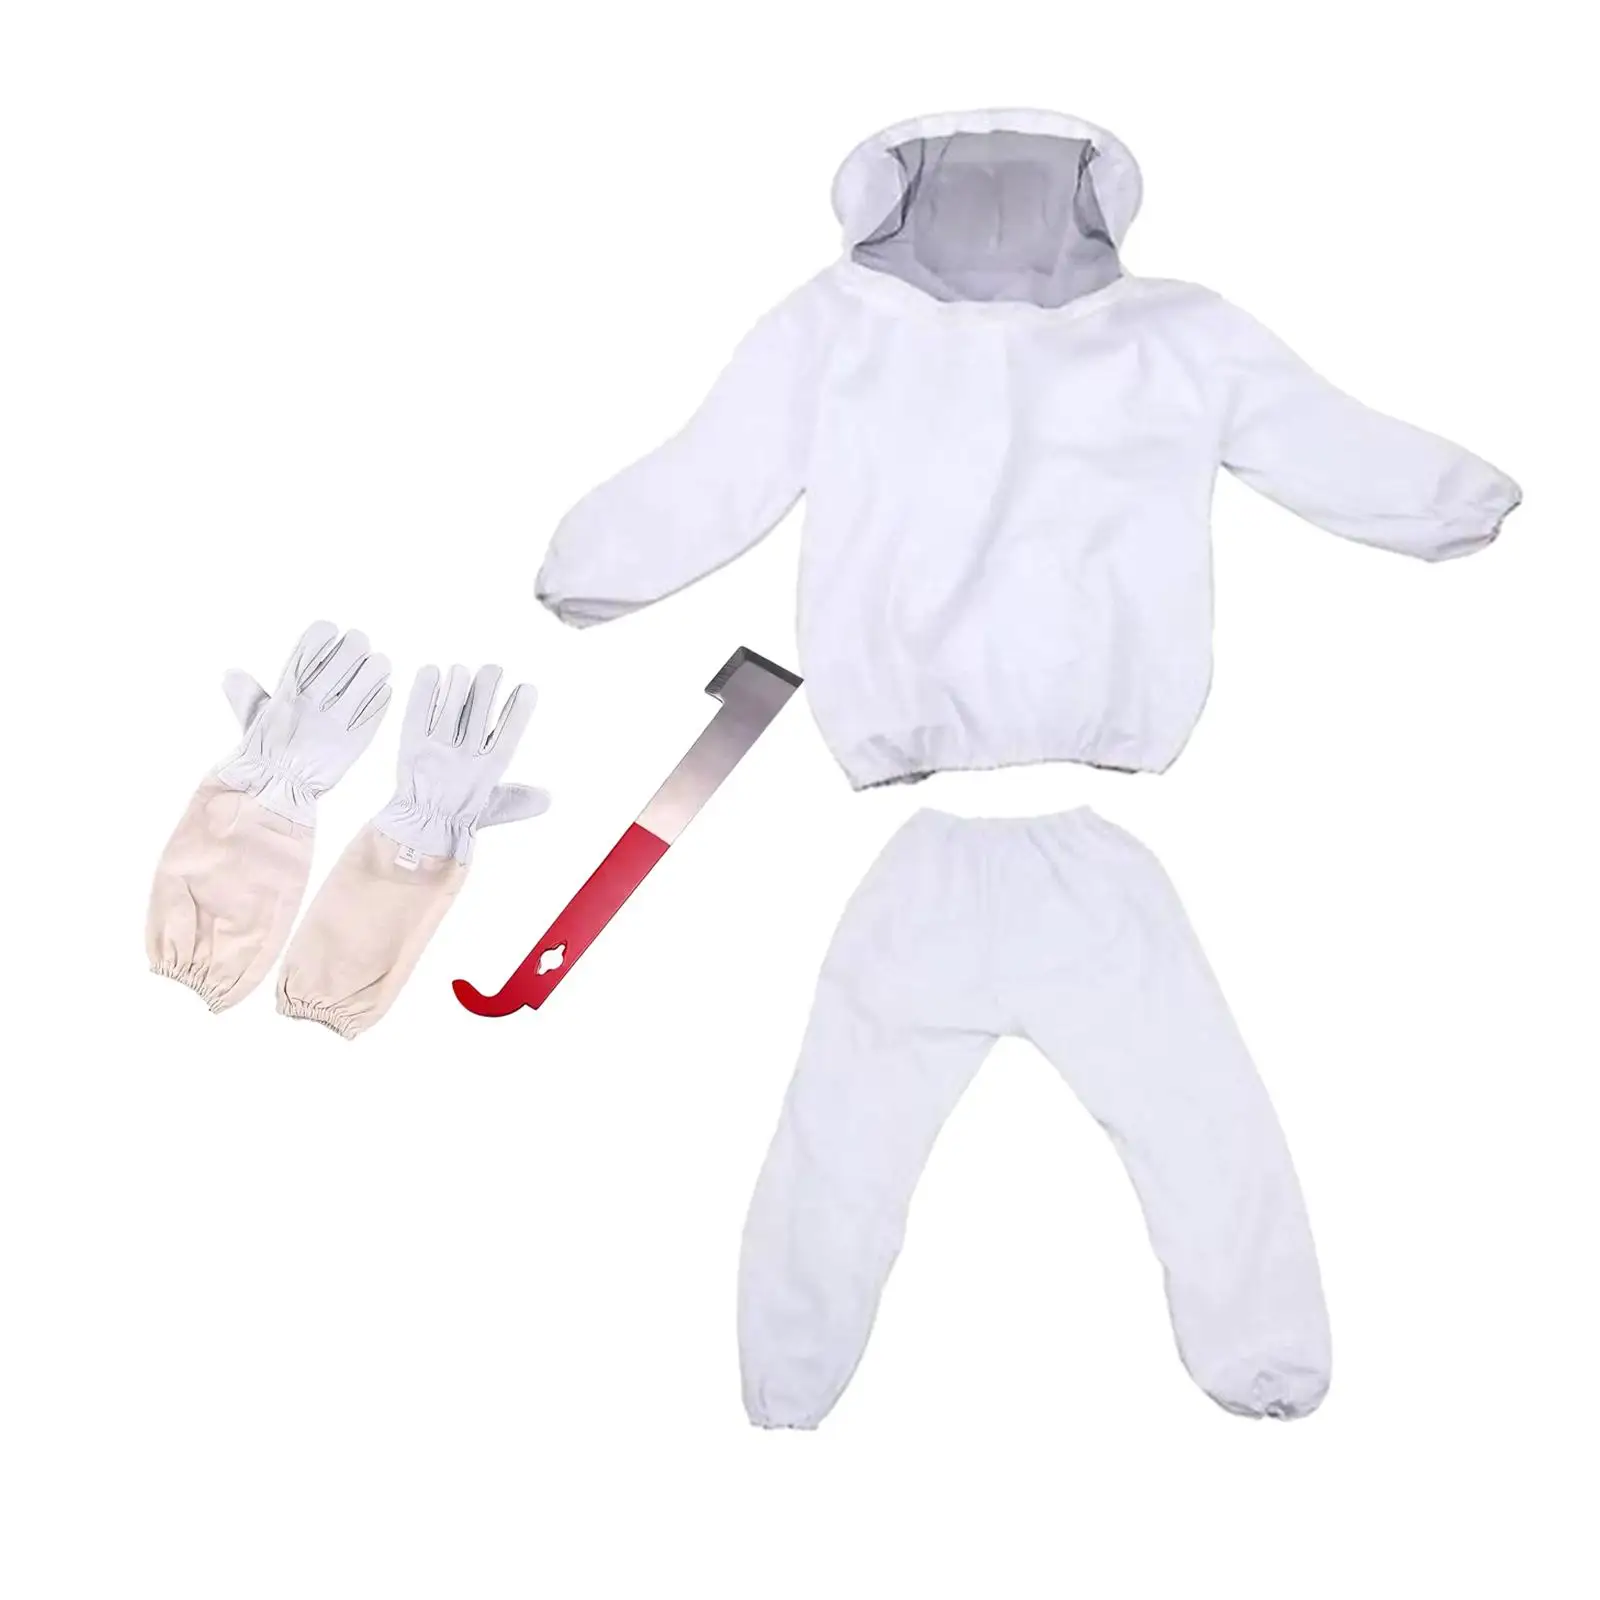 Beekeeping Suit Cotton Protective Equipment Anti Bee Suit Beekeeping Clothes for Male and Female